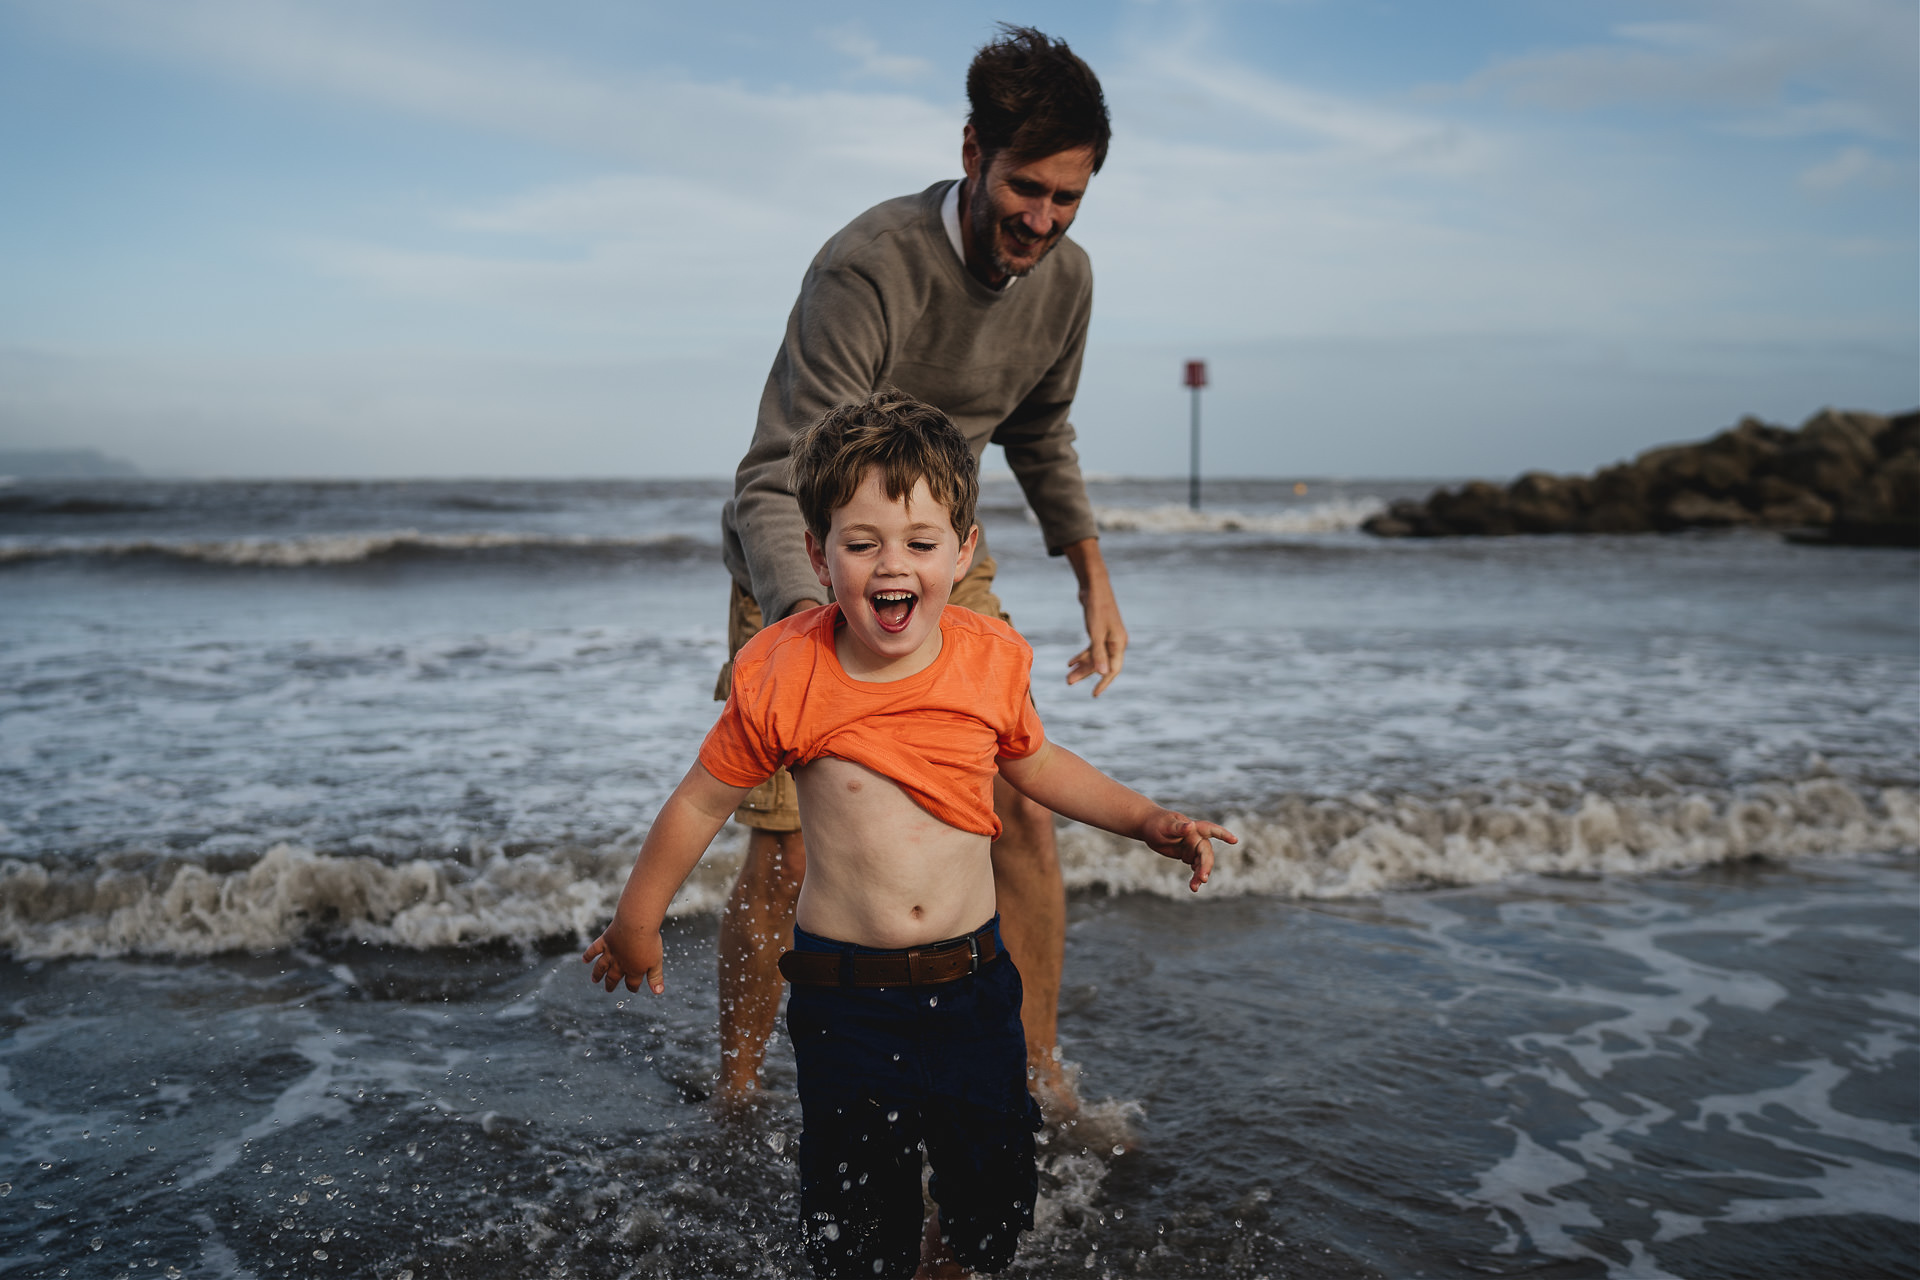 A young boy playing in the sea with his father